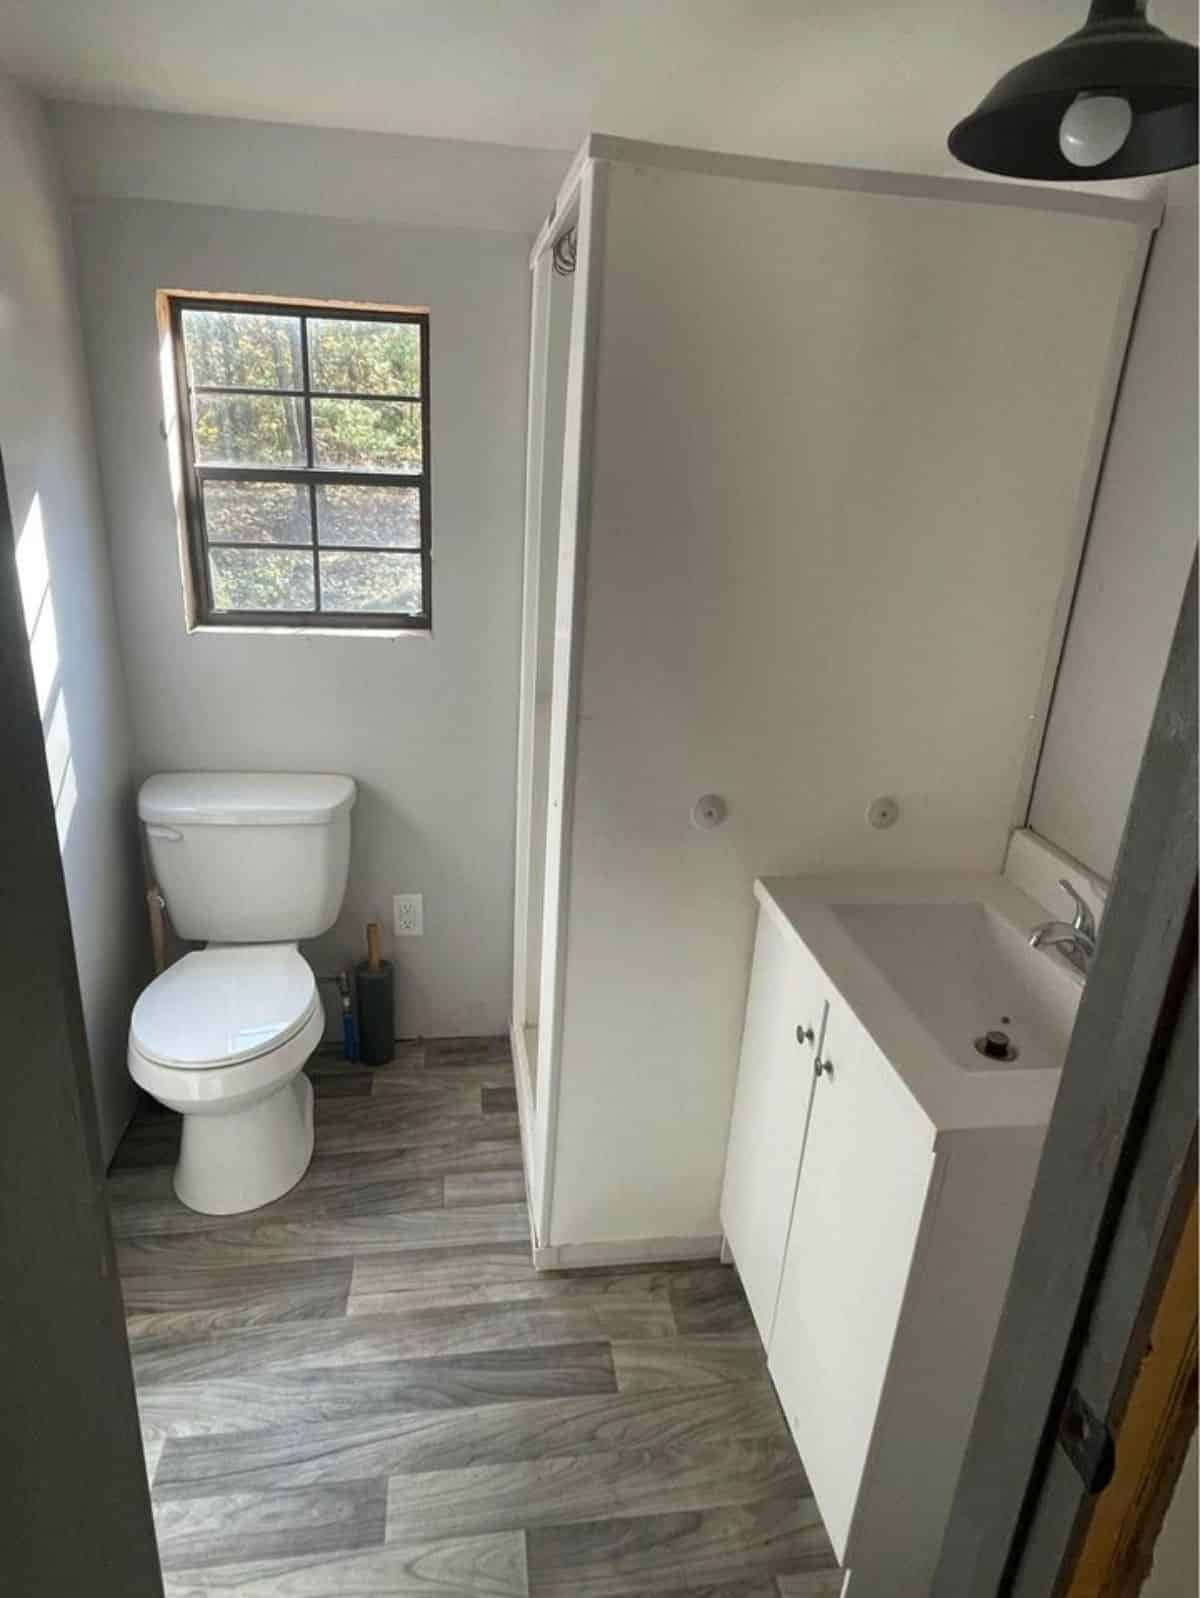 Bathroom of 28' Amish Tiny House with all the necessary fittings